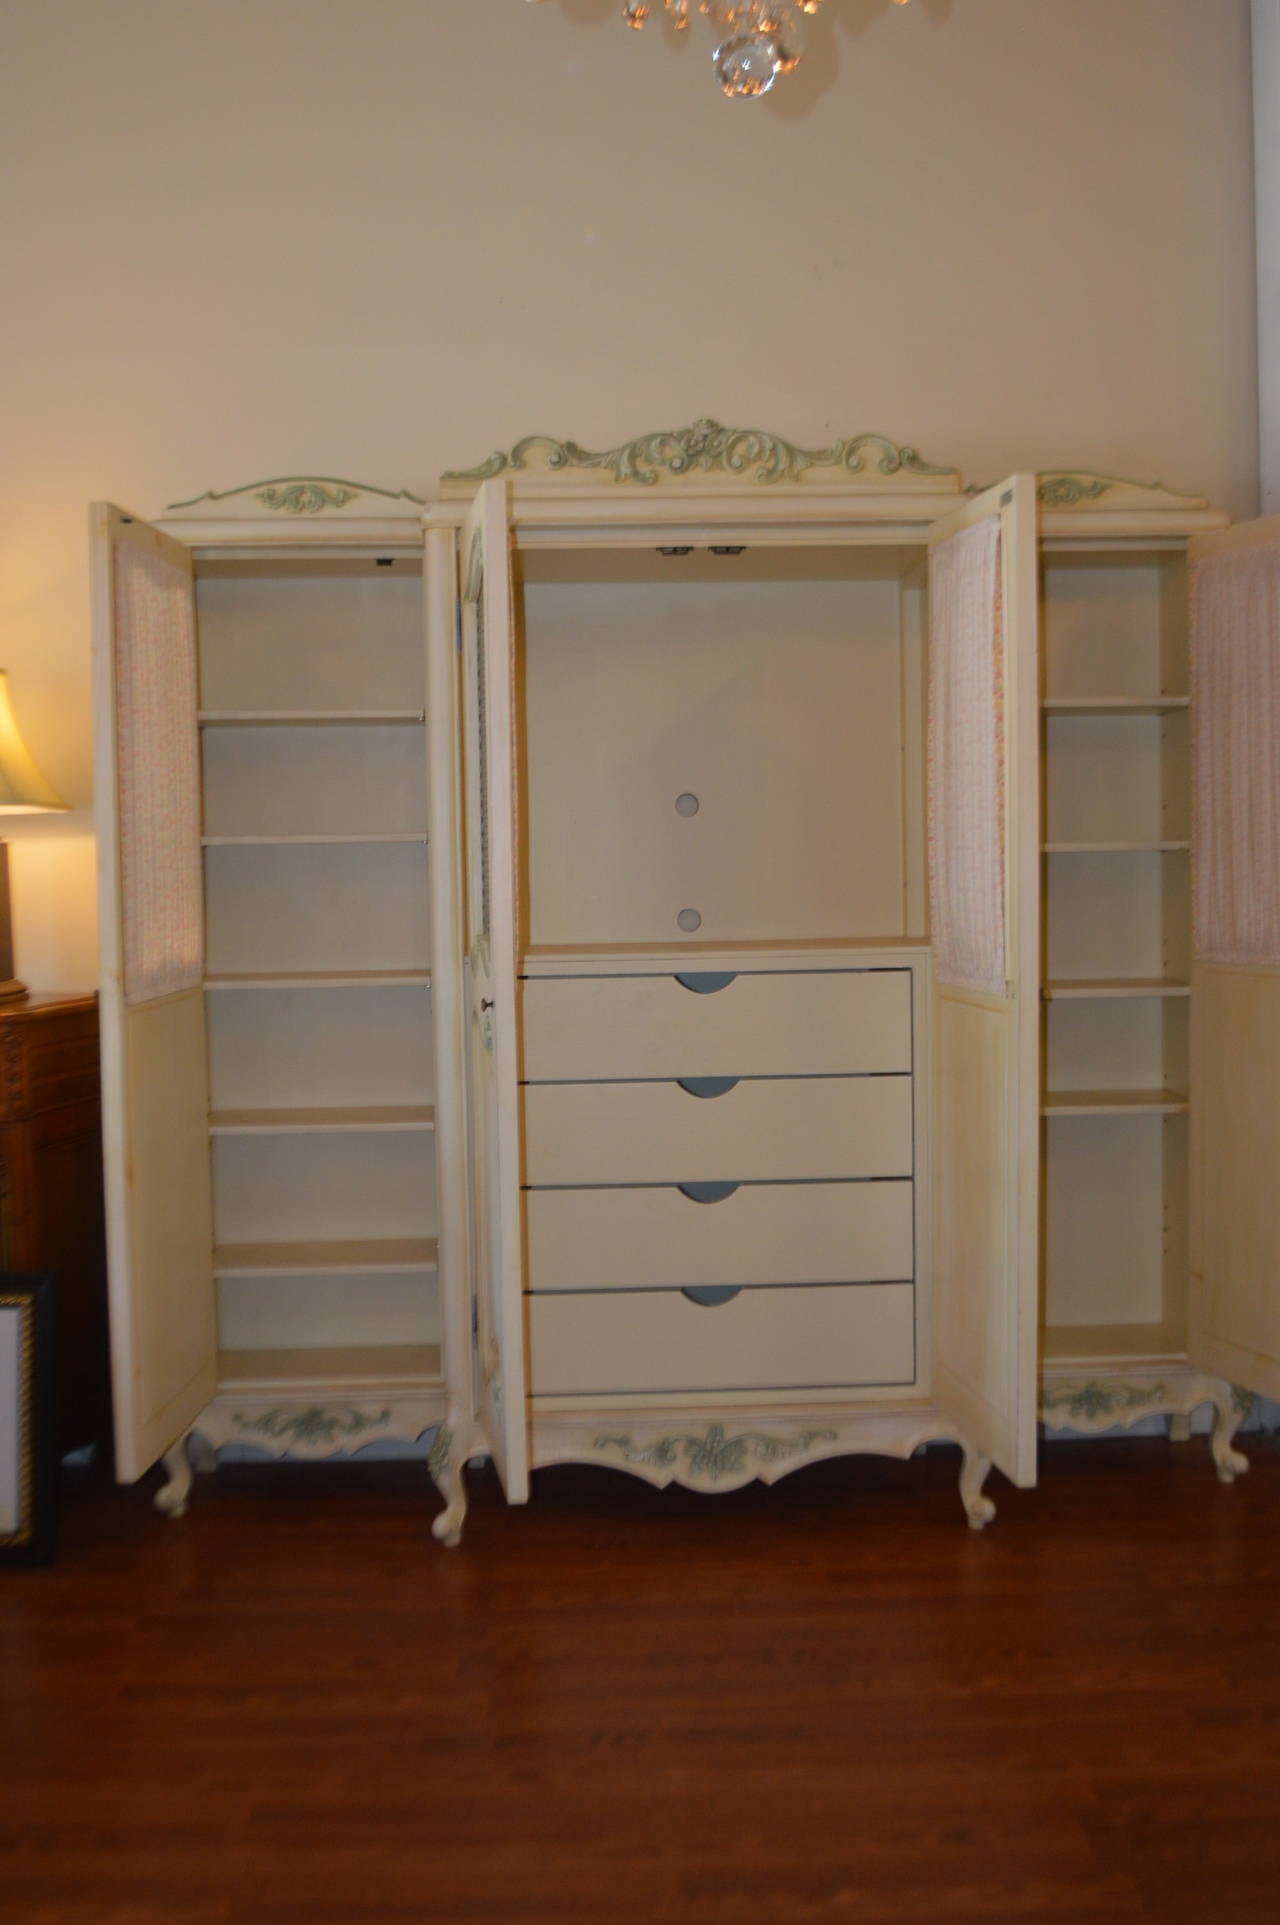 Beautiful custom built four-door armoire painted in a cream tone with amazing carved details of roses on each leg. The hand carving accents are painted in soft green. The door panels have a metal grill insert.
This armoire is most versatile, could